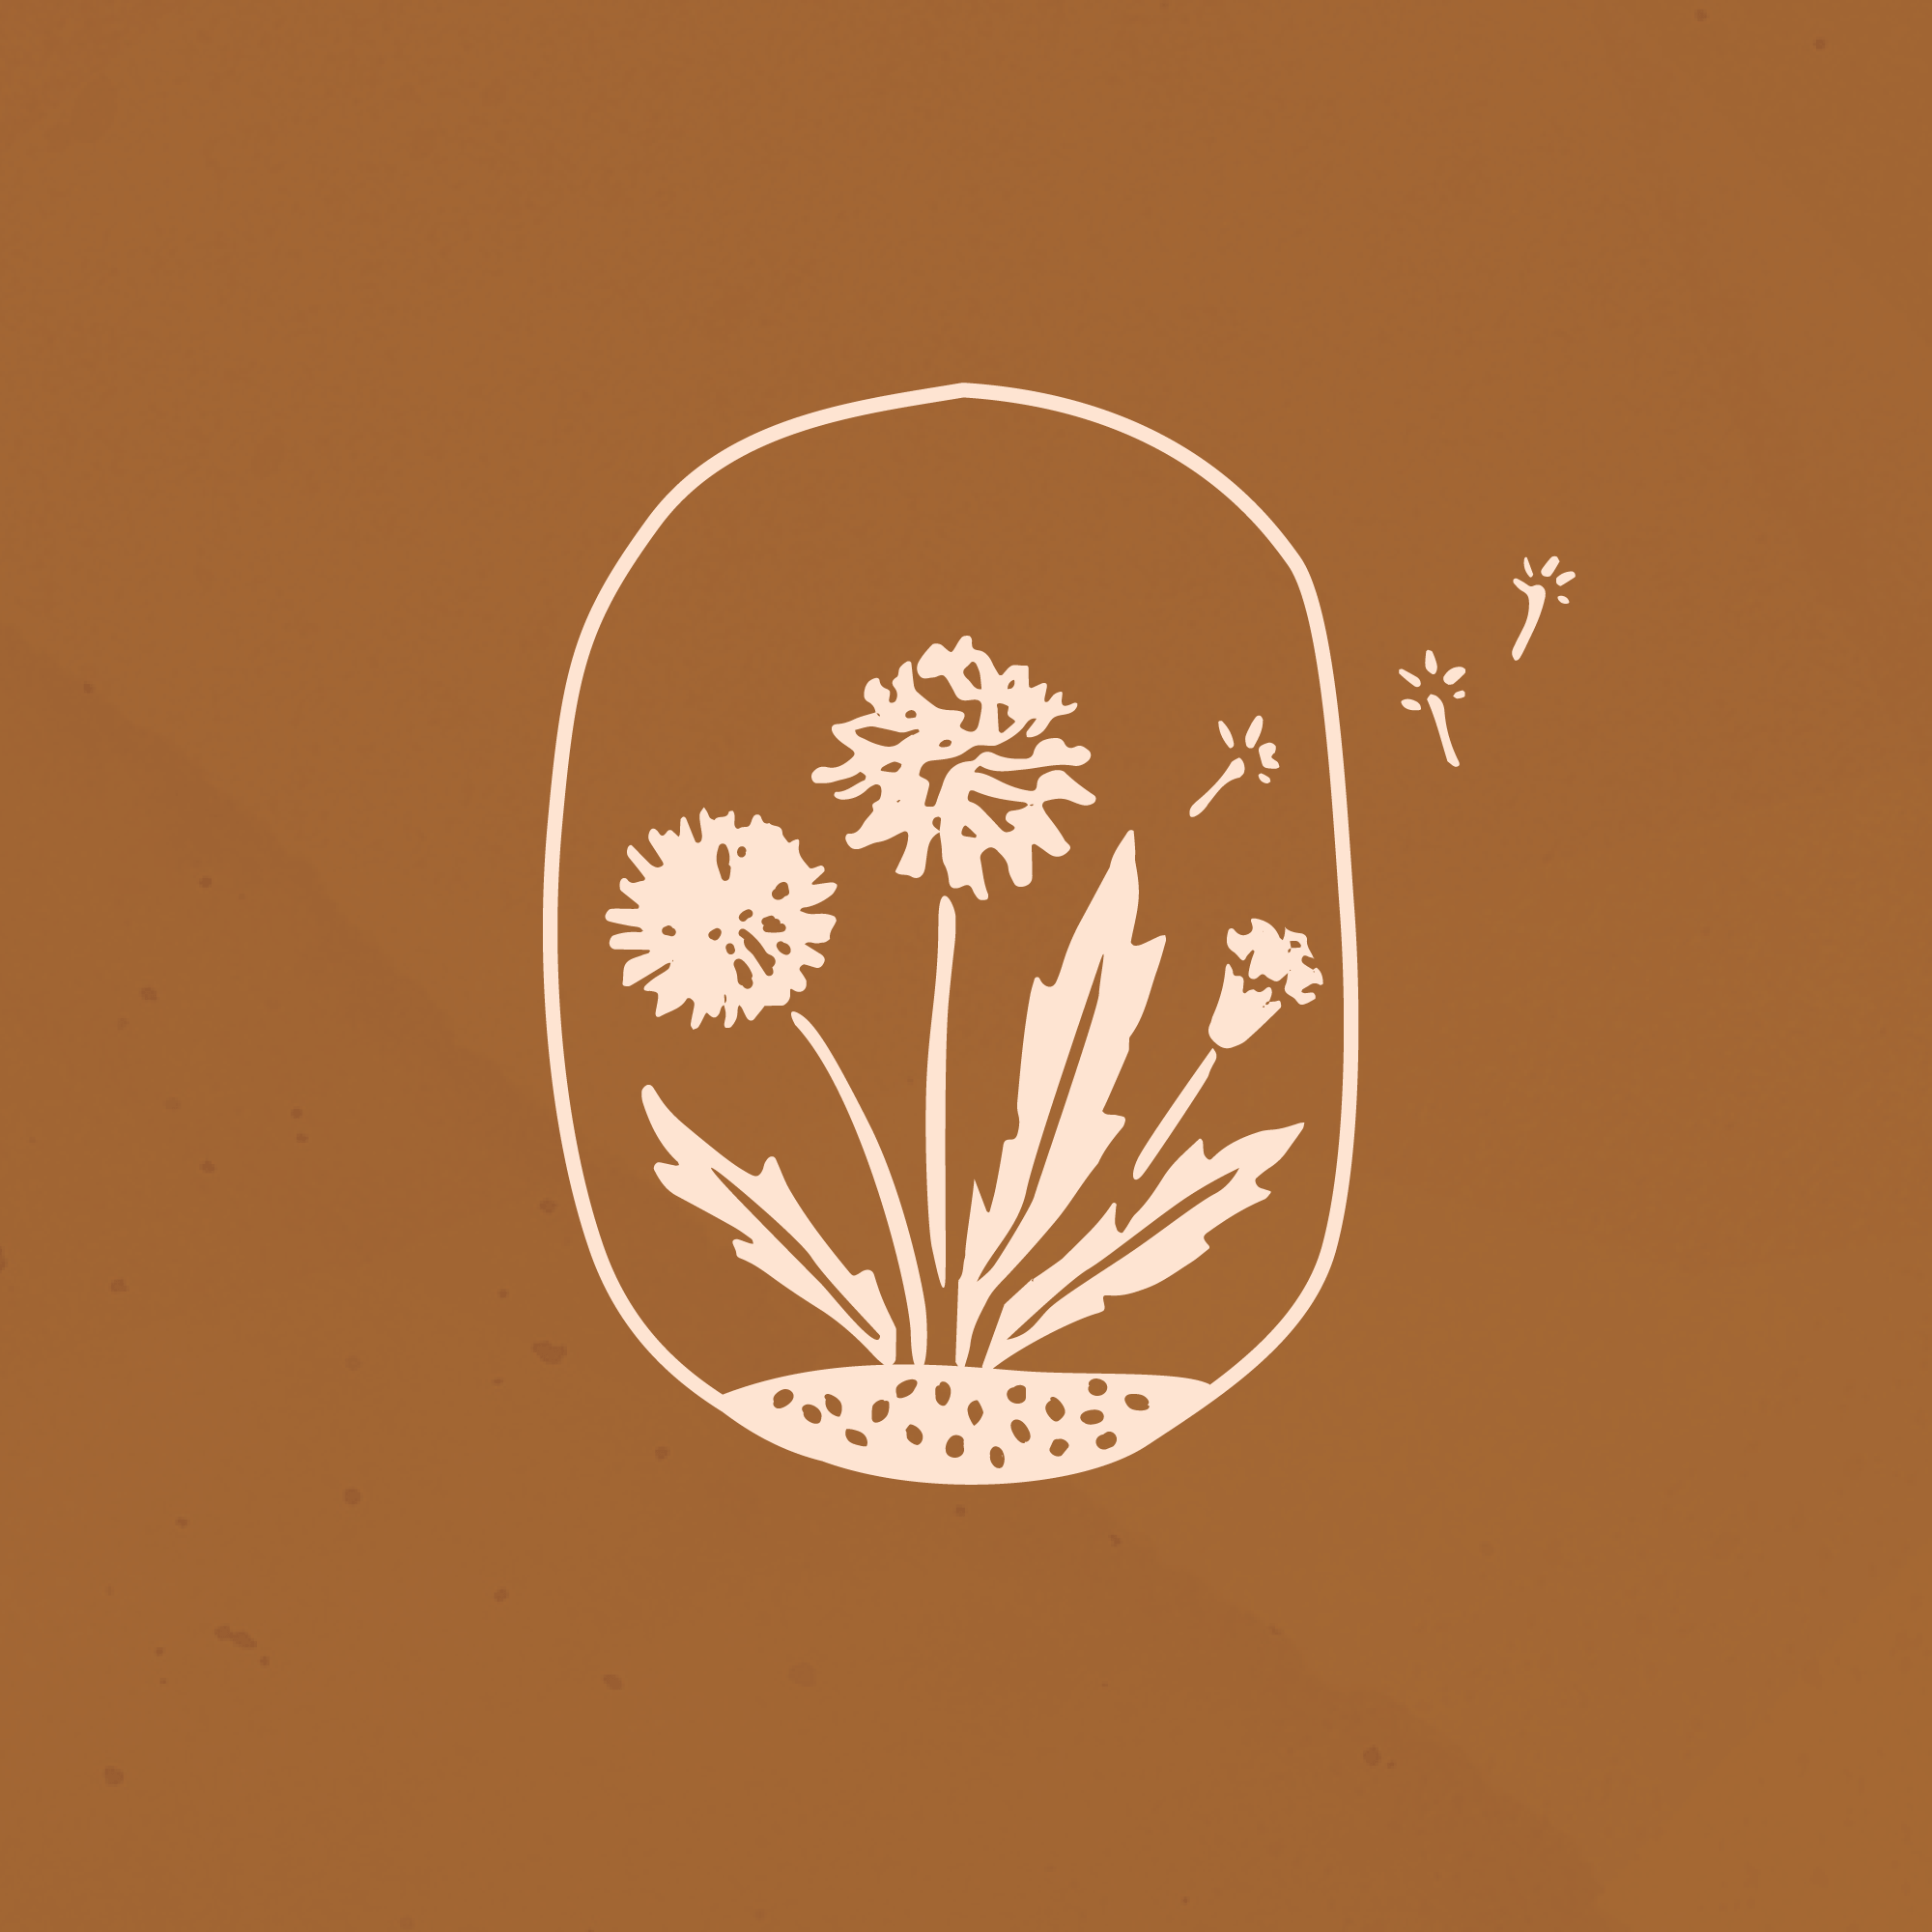 A brown background with a white circle in the middle. In the circle, there are three dandelions with white petals and green stems. - Dandelions